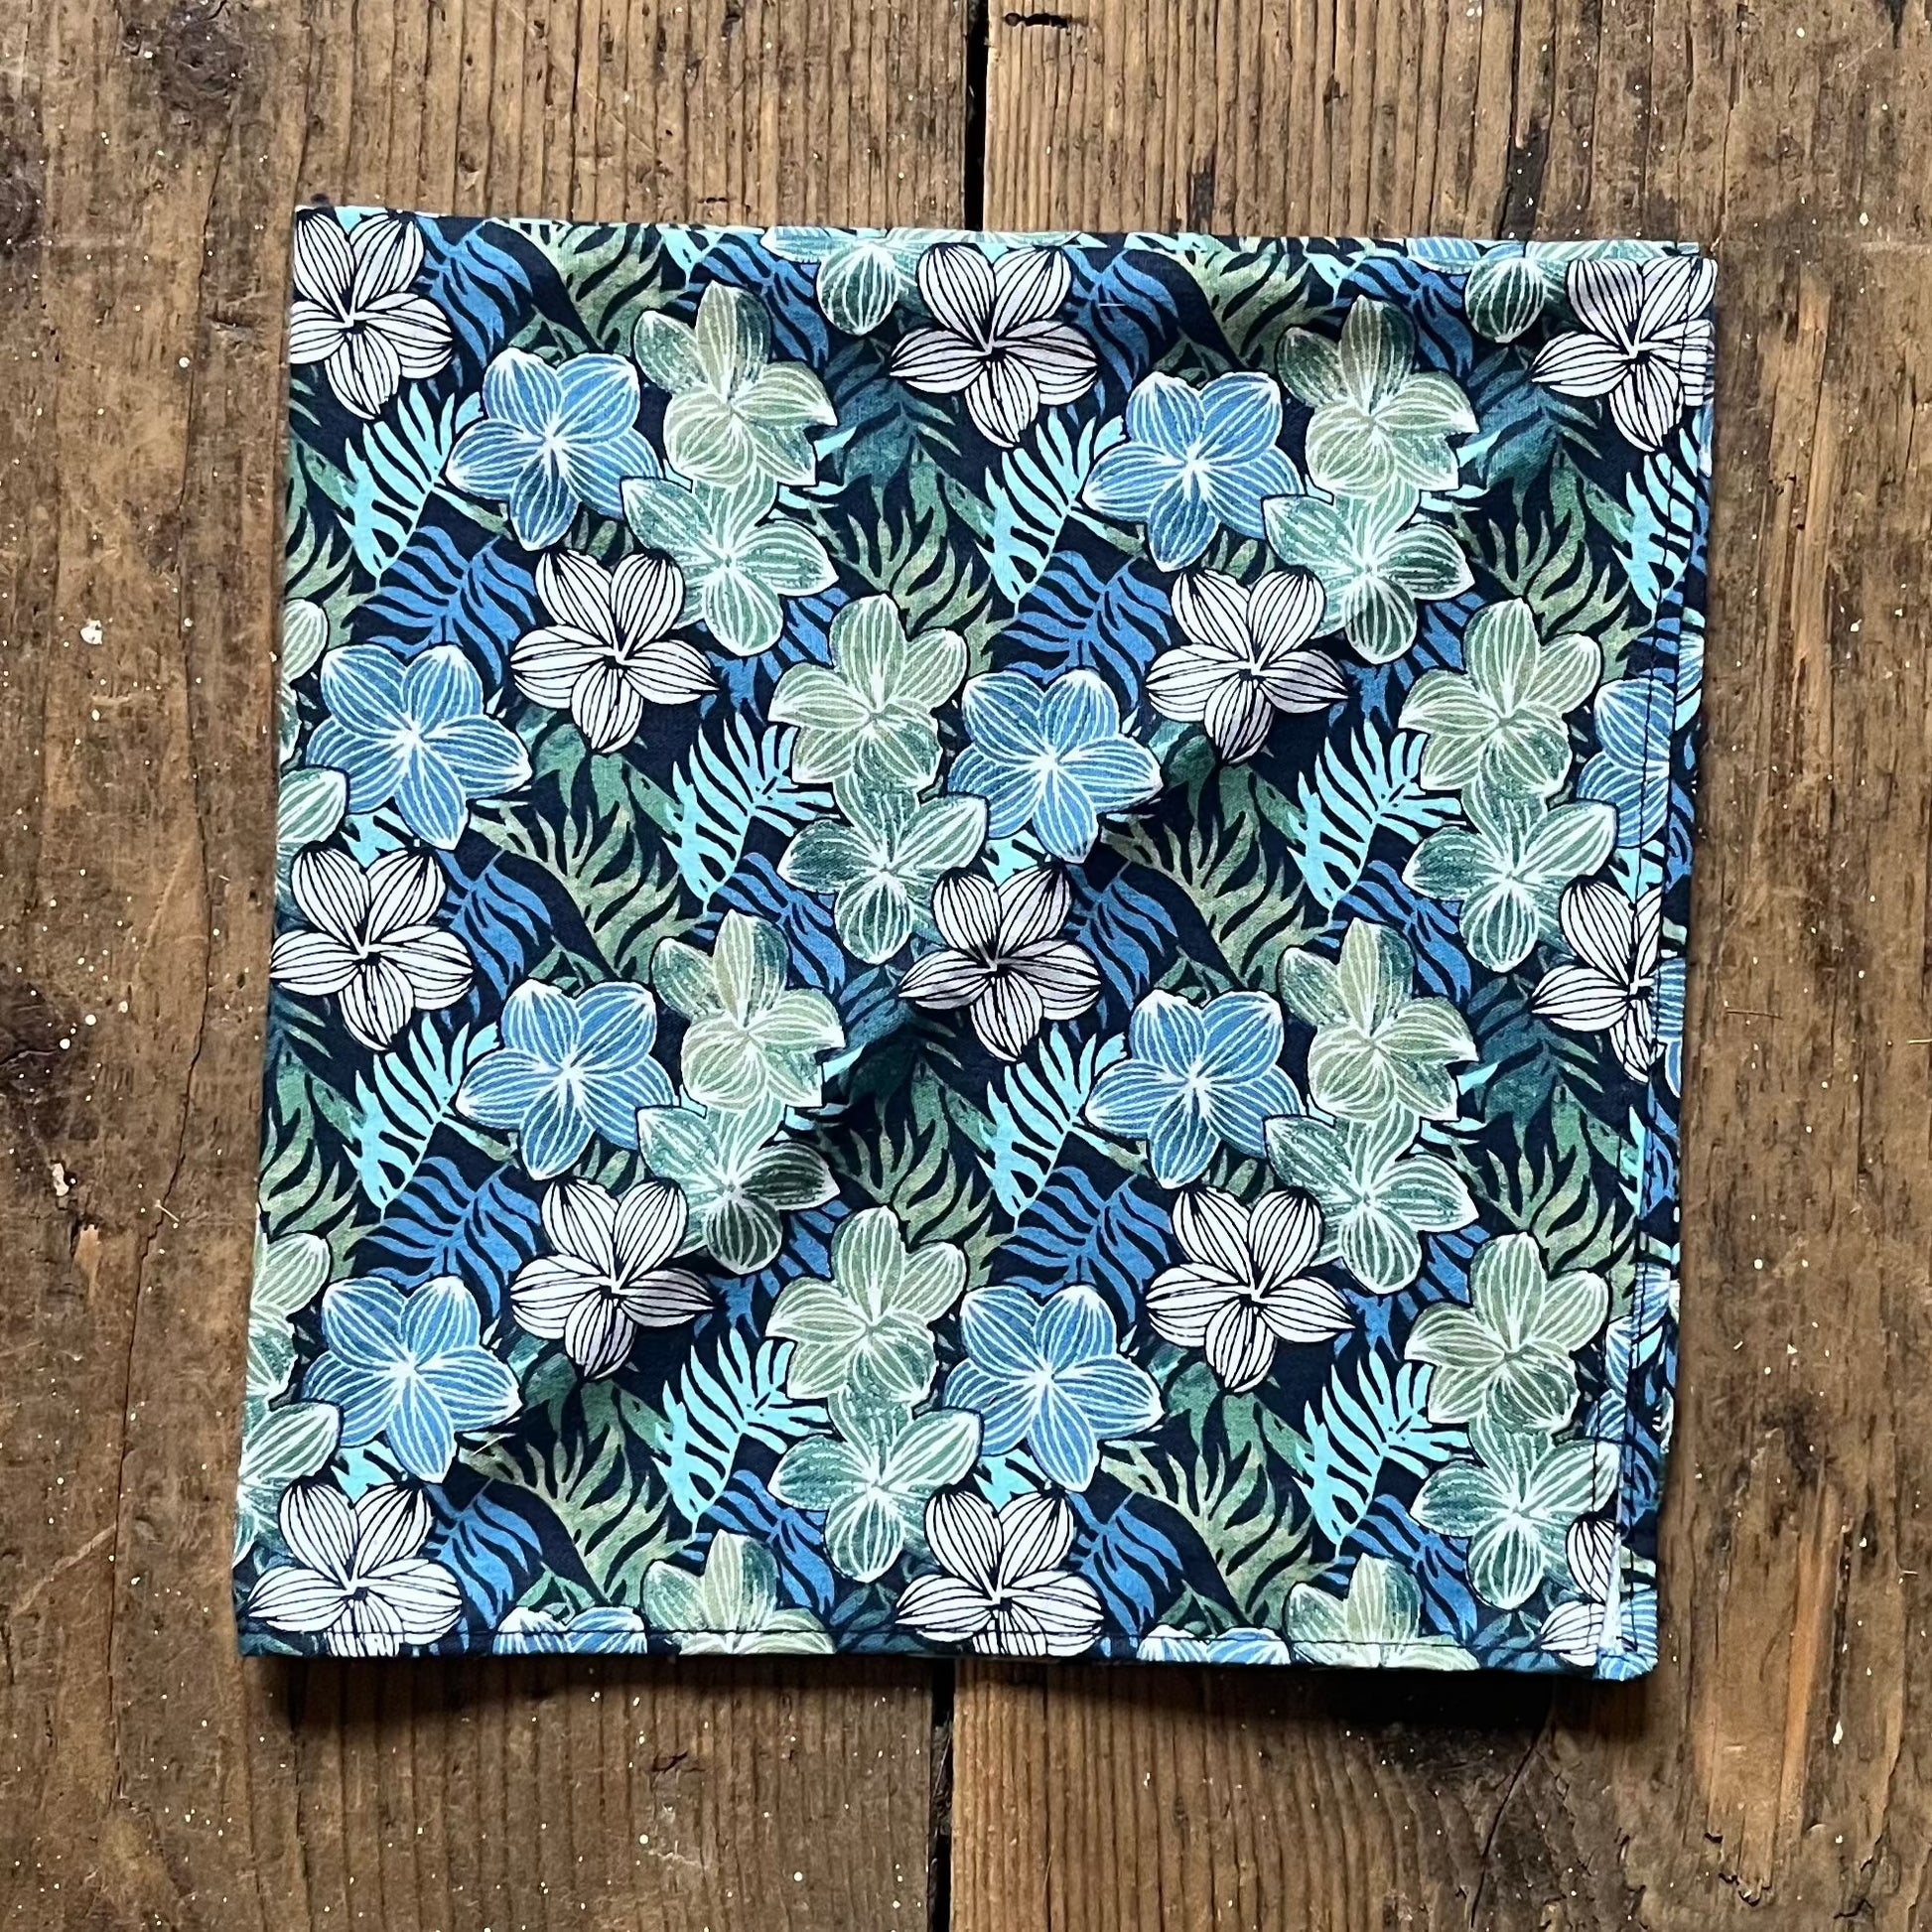 Cotton pocket square with blue and green flowers